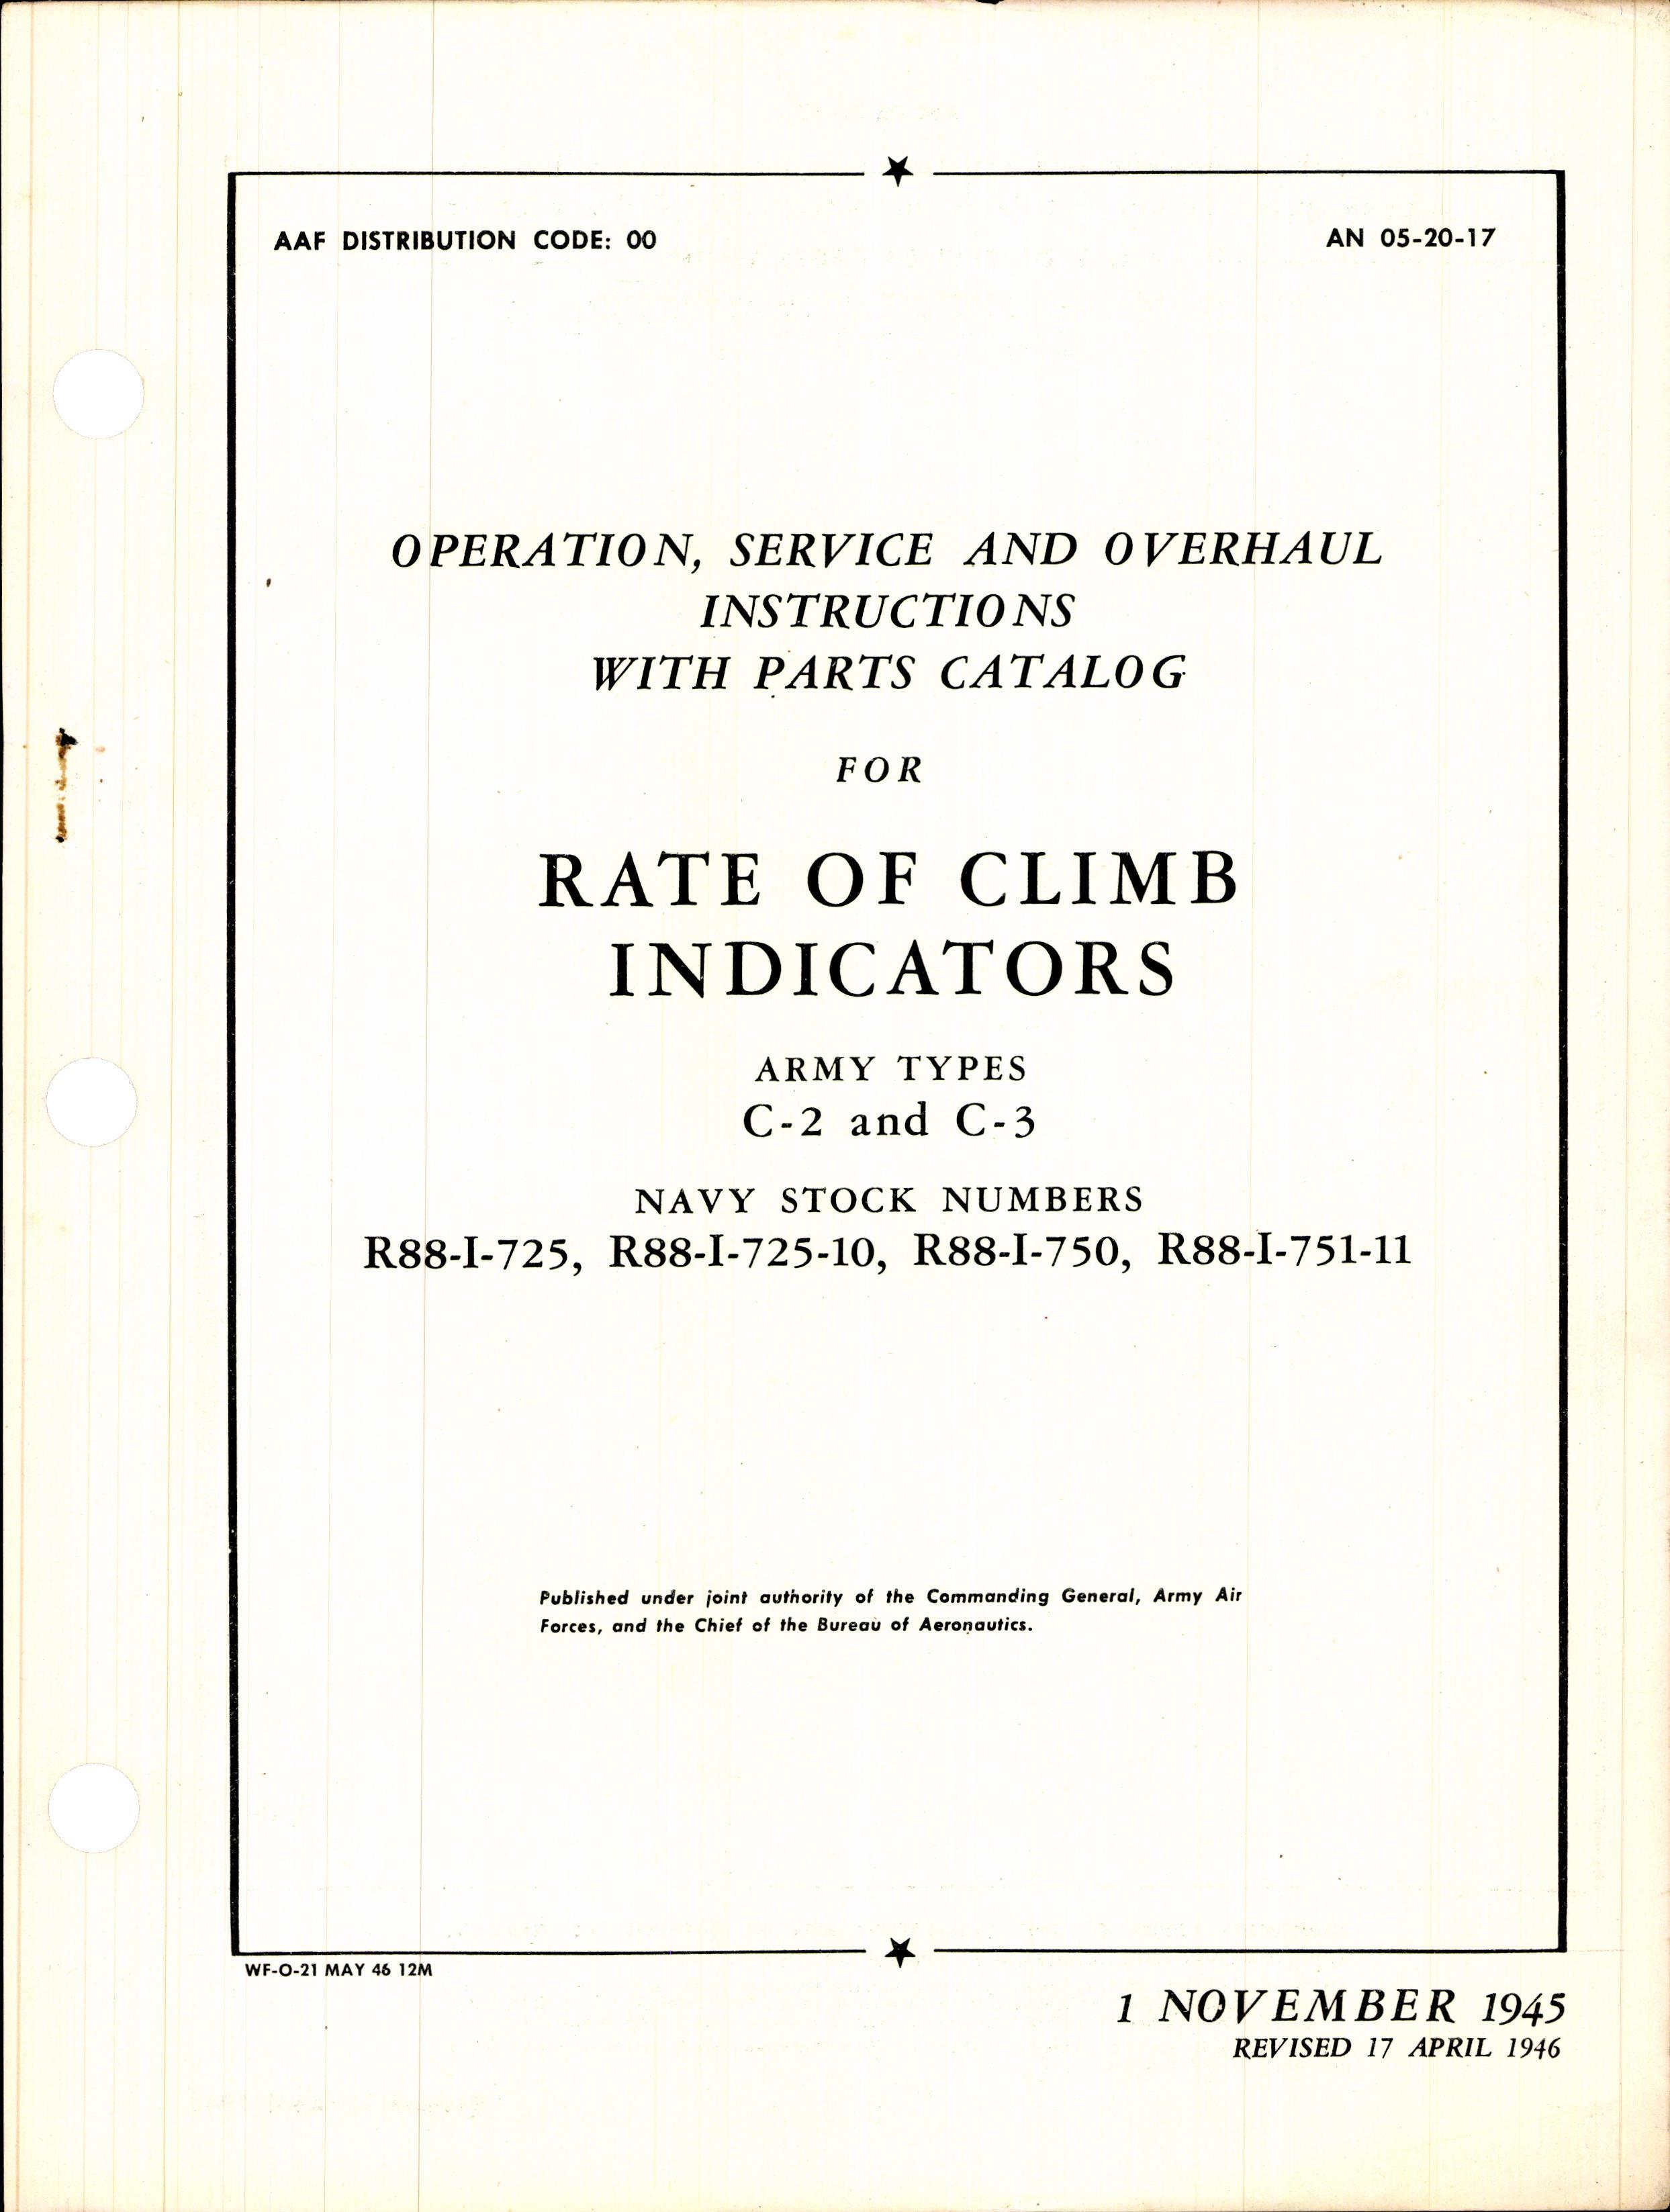 Sample page 3 from AirCorps Library document: Operation, Service, & Overhaul Instructions with Parts Catalog for Type C-2 and C-3 Rate of Climb Indicators